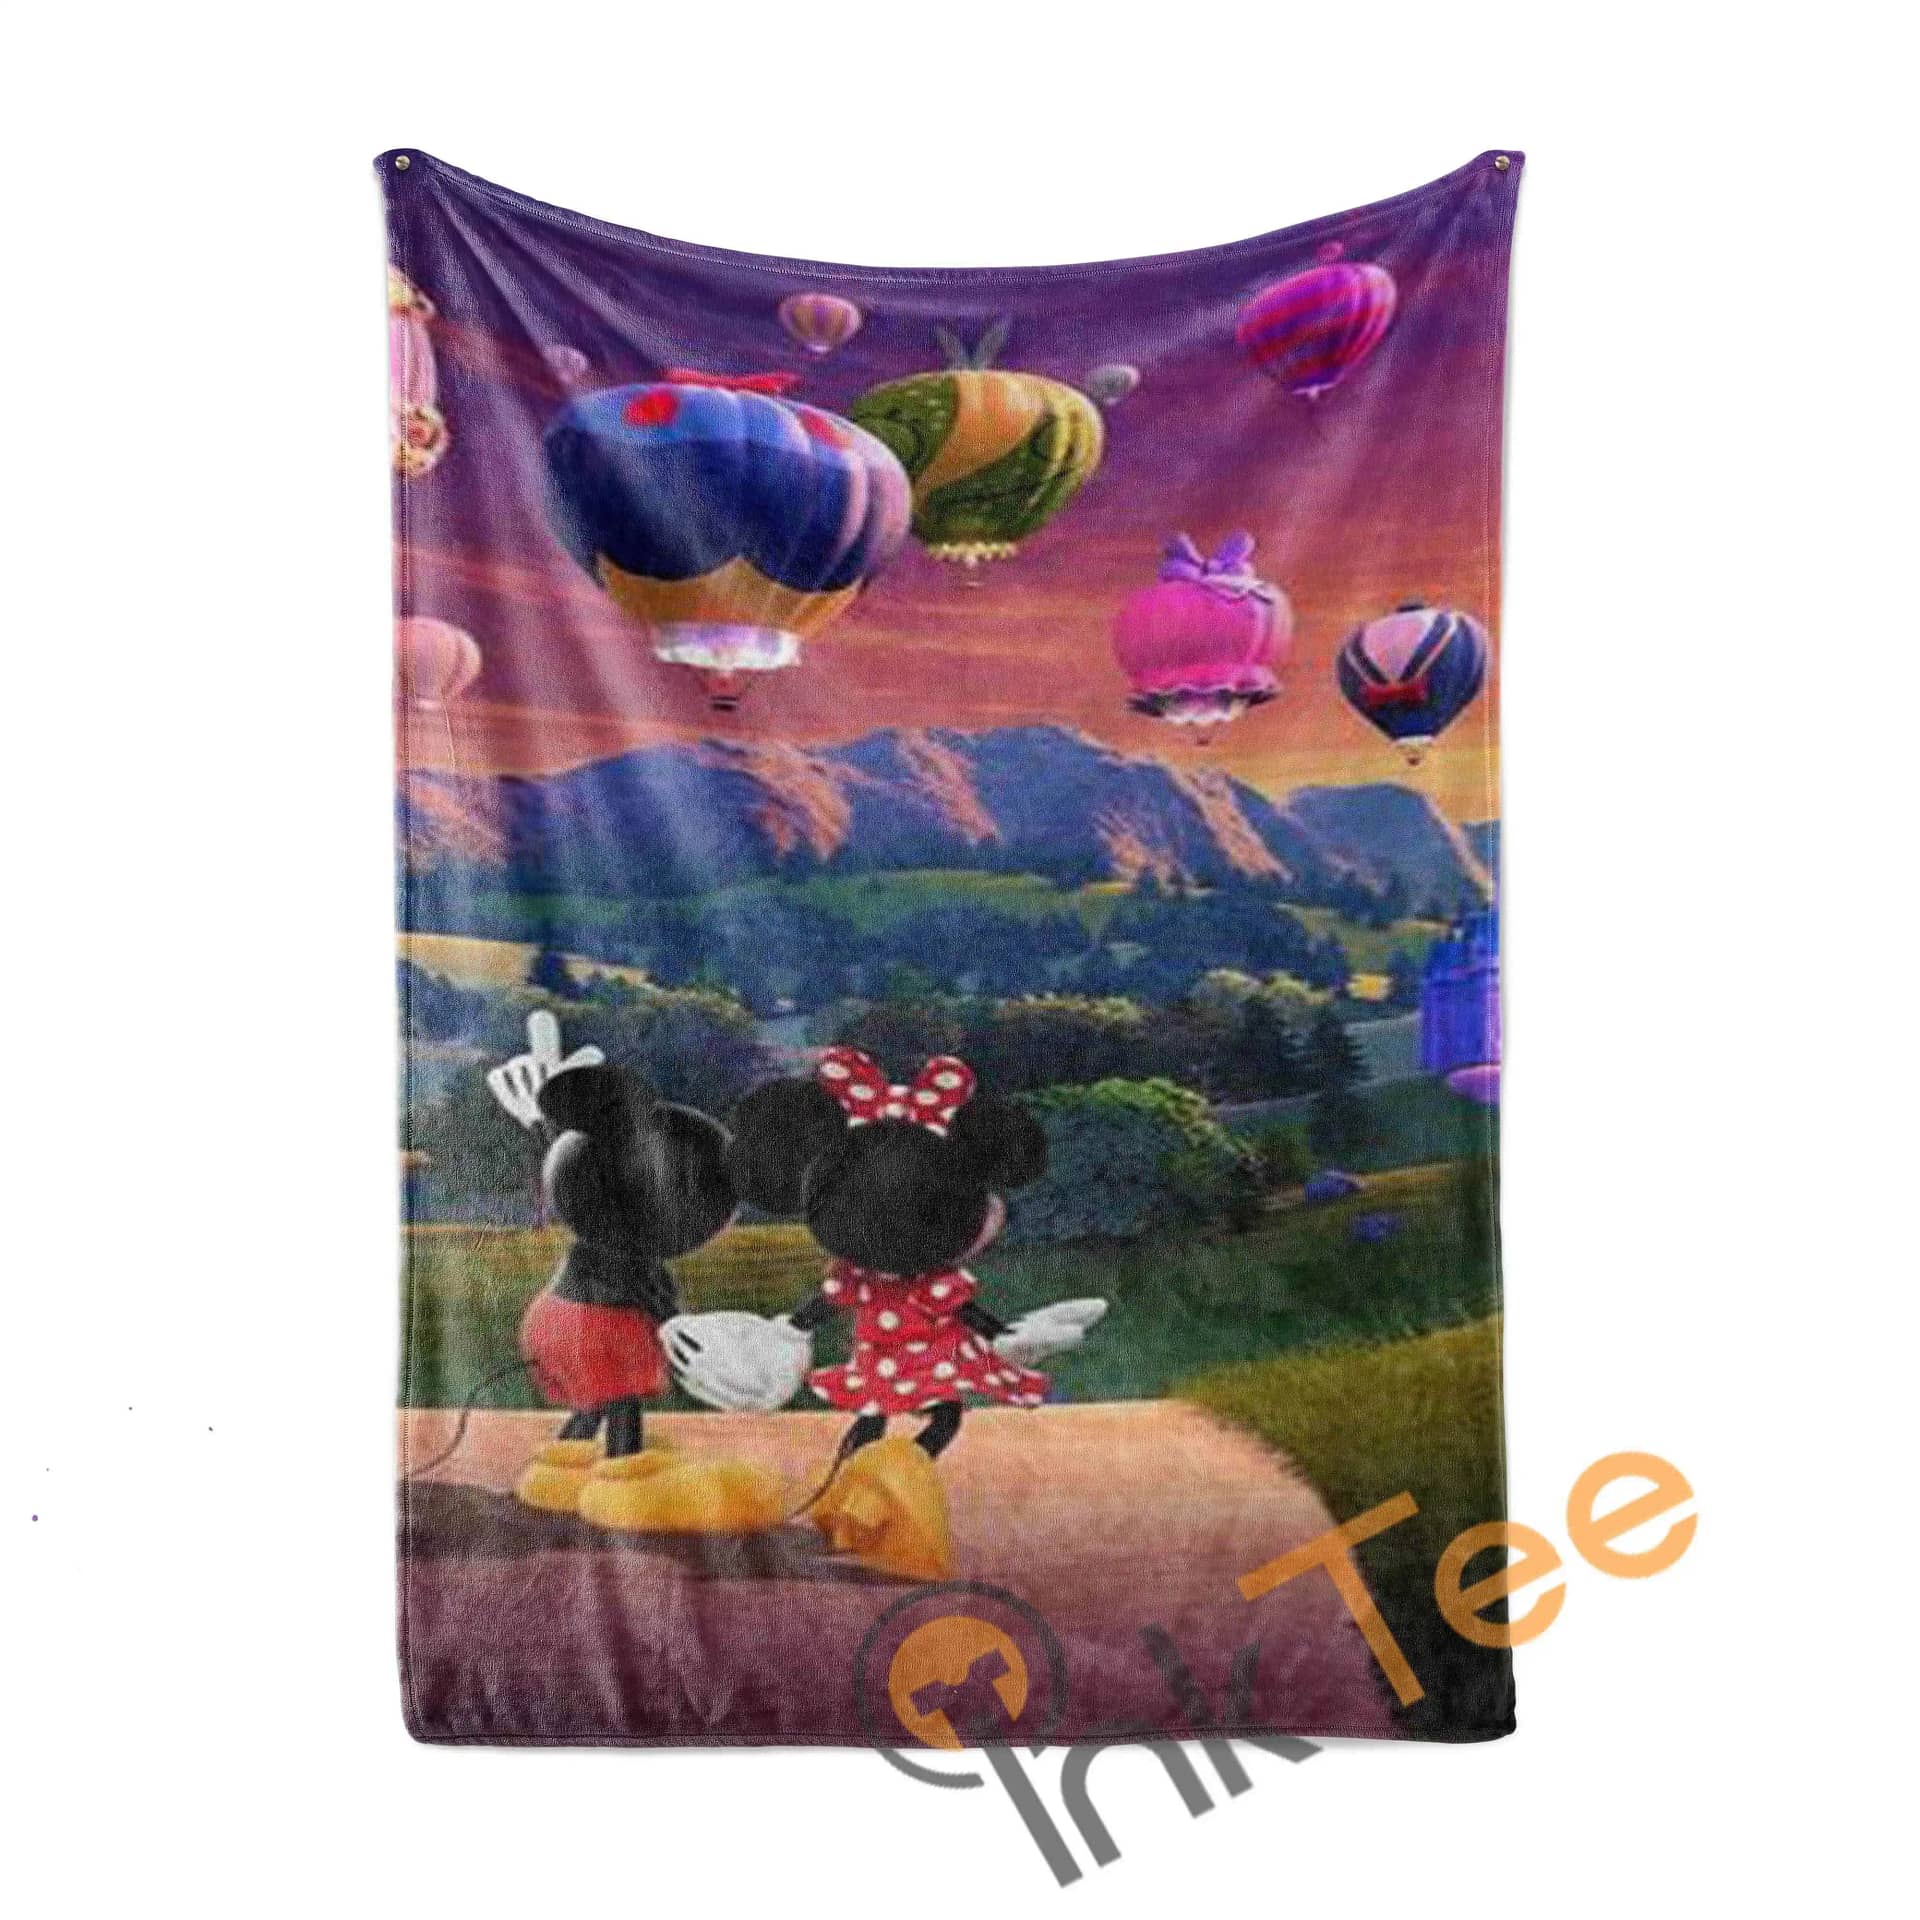 Minnie And Mickey Mouse Couple Limited Edition Amazon Best Seller Sku 4089 Fleece Blanket